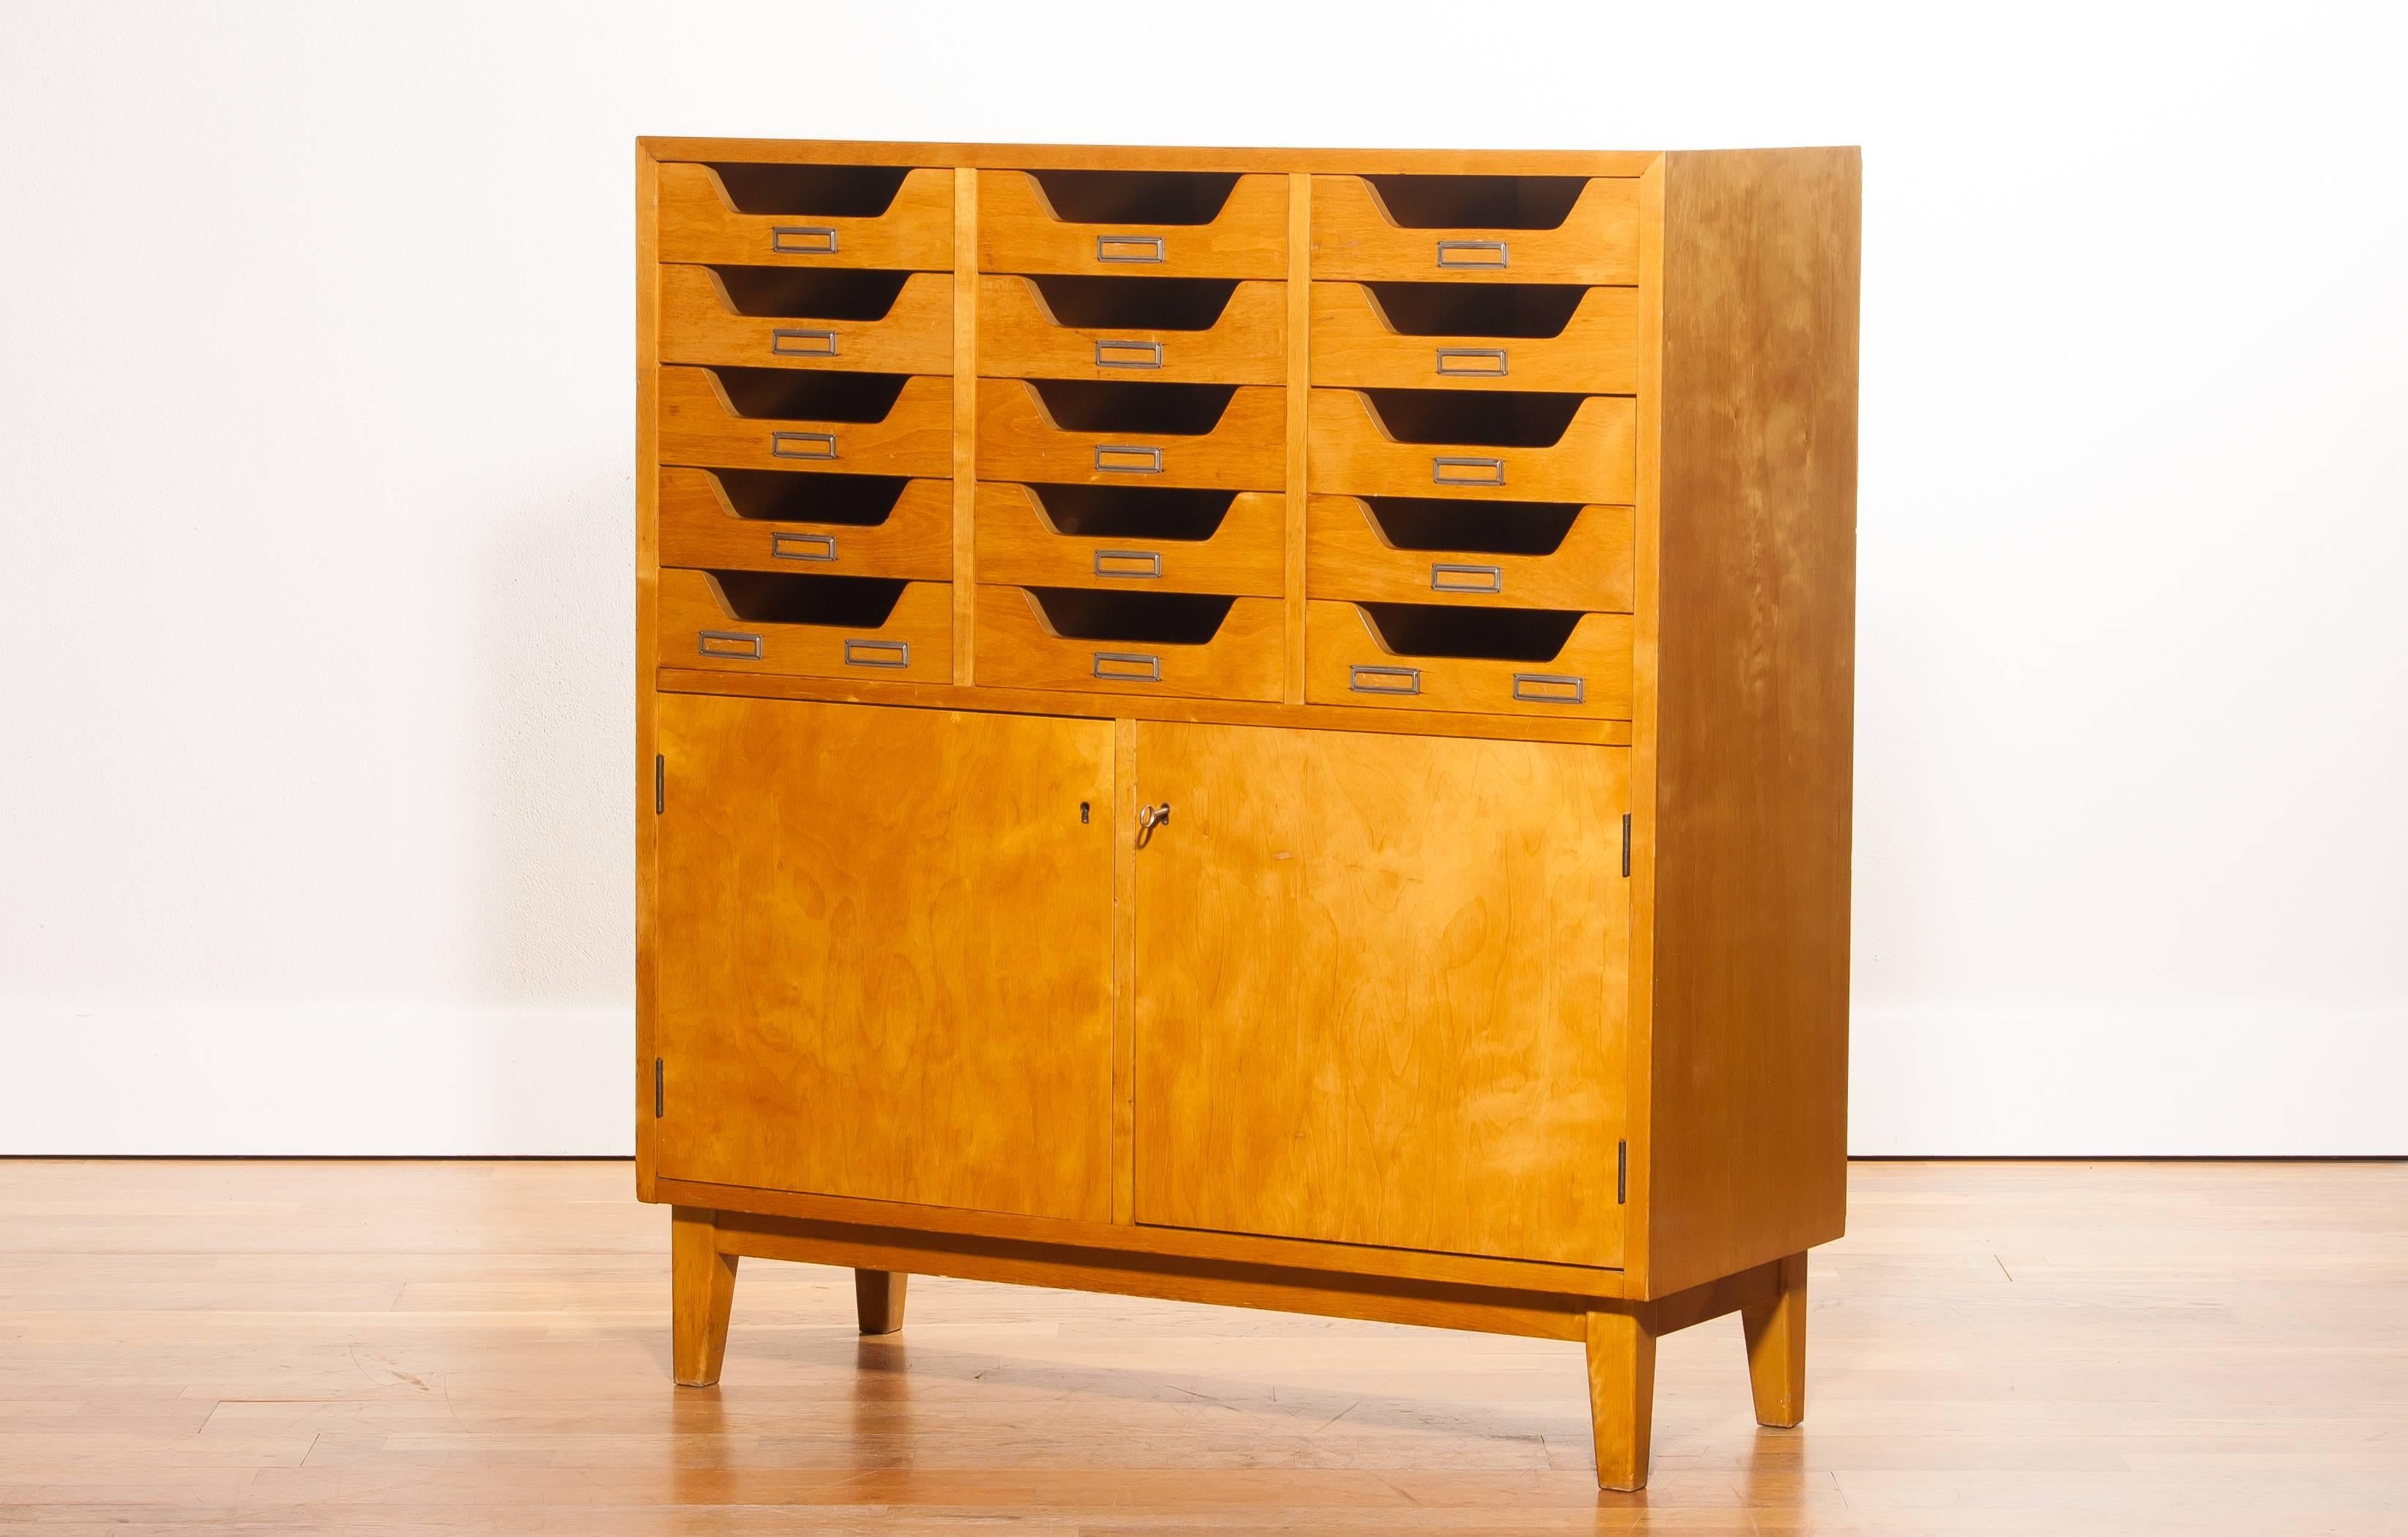 Very beautiful looking archive cabinet made by Jakobsson Industrier for Säffle Sweden.
The cabinet is made of elm and has 15 archive drawers and two doors.
It is in a very nice condition.
Period 1550s
Dimensions: H 100 cm, W 90 cm, D 35 cm.